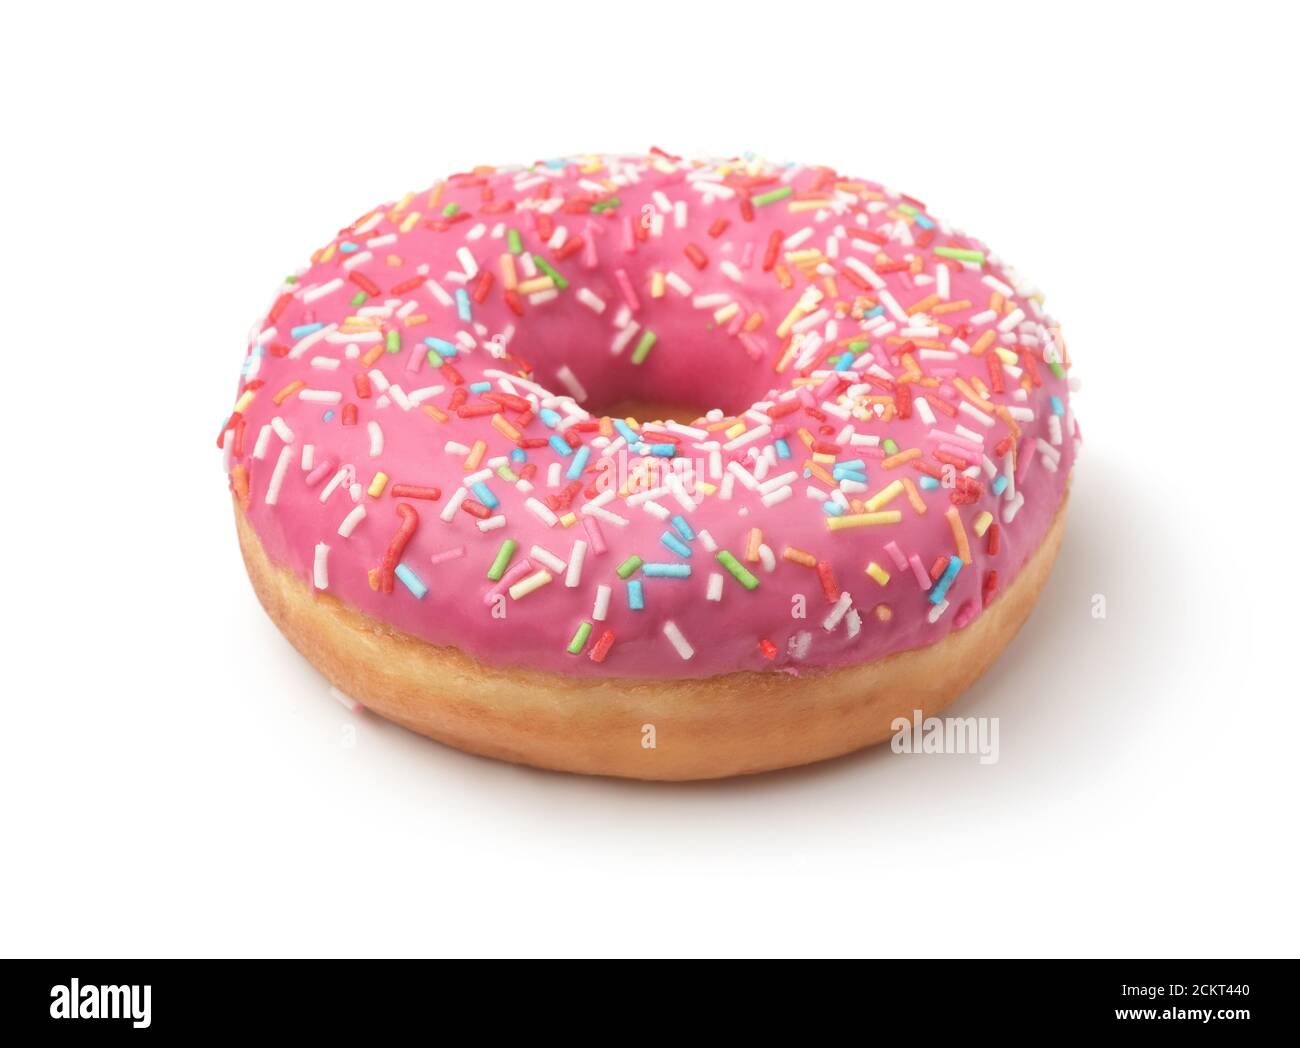 Pink frosted donut with colorful sprinkles isolated on white Stock Photo